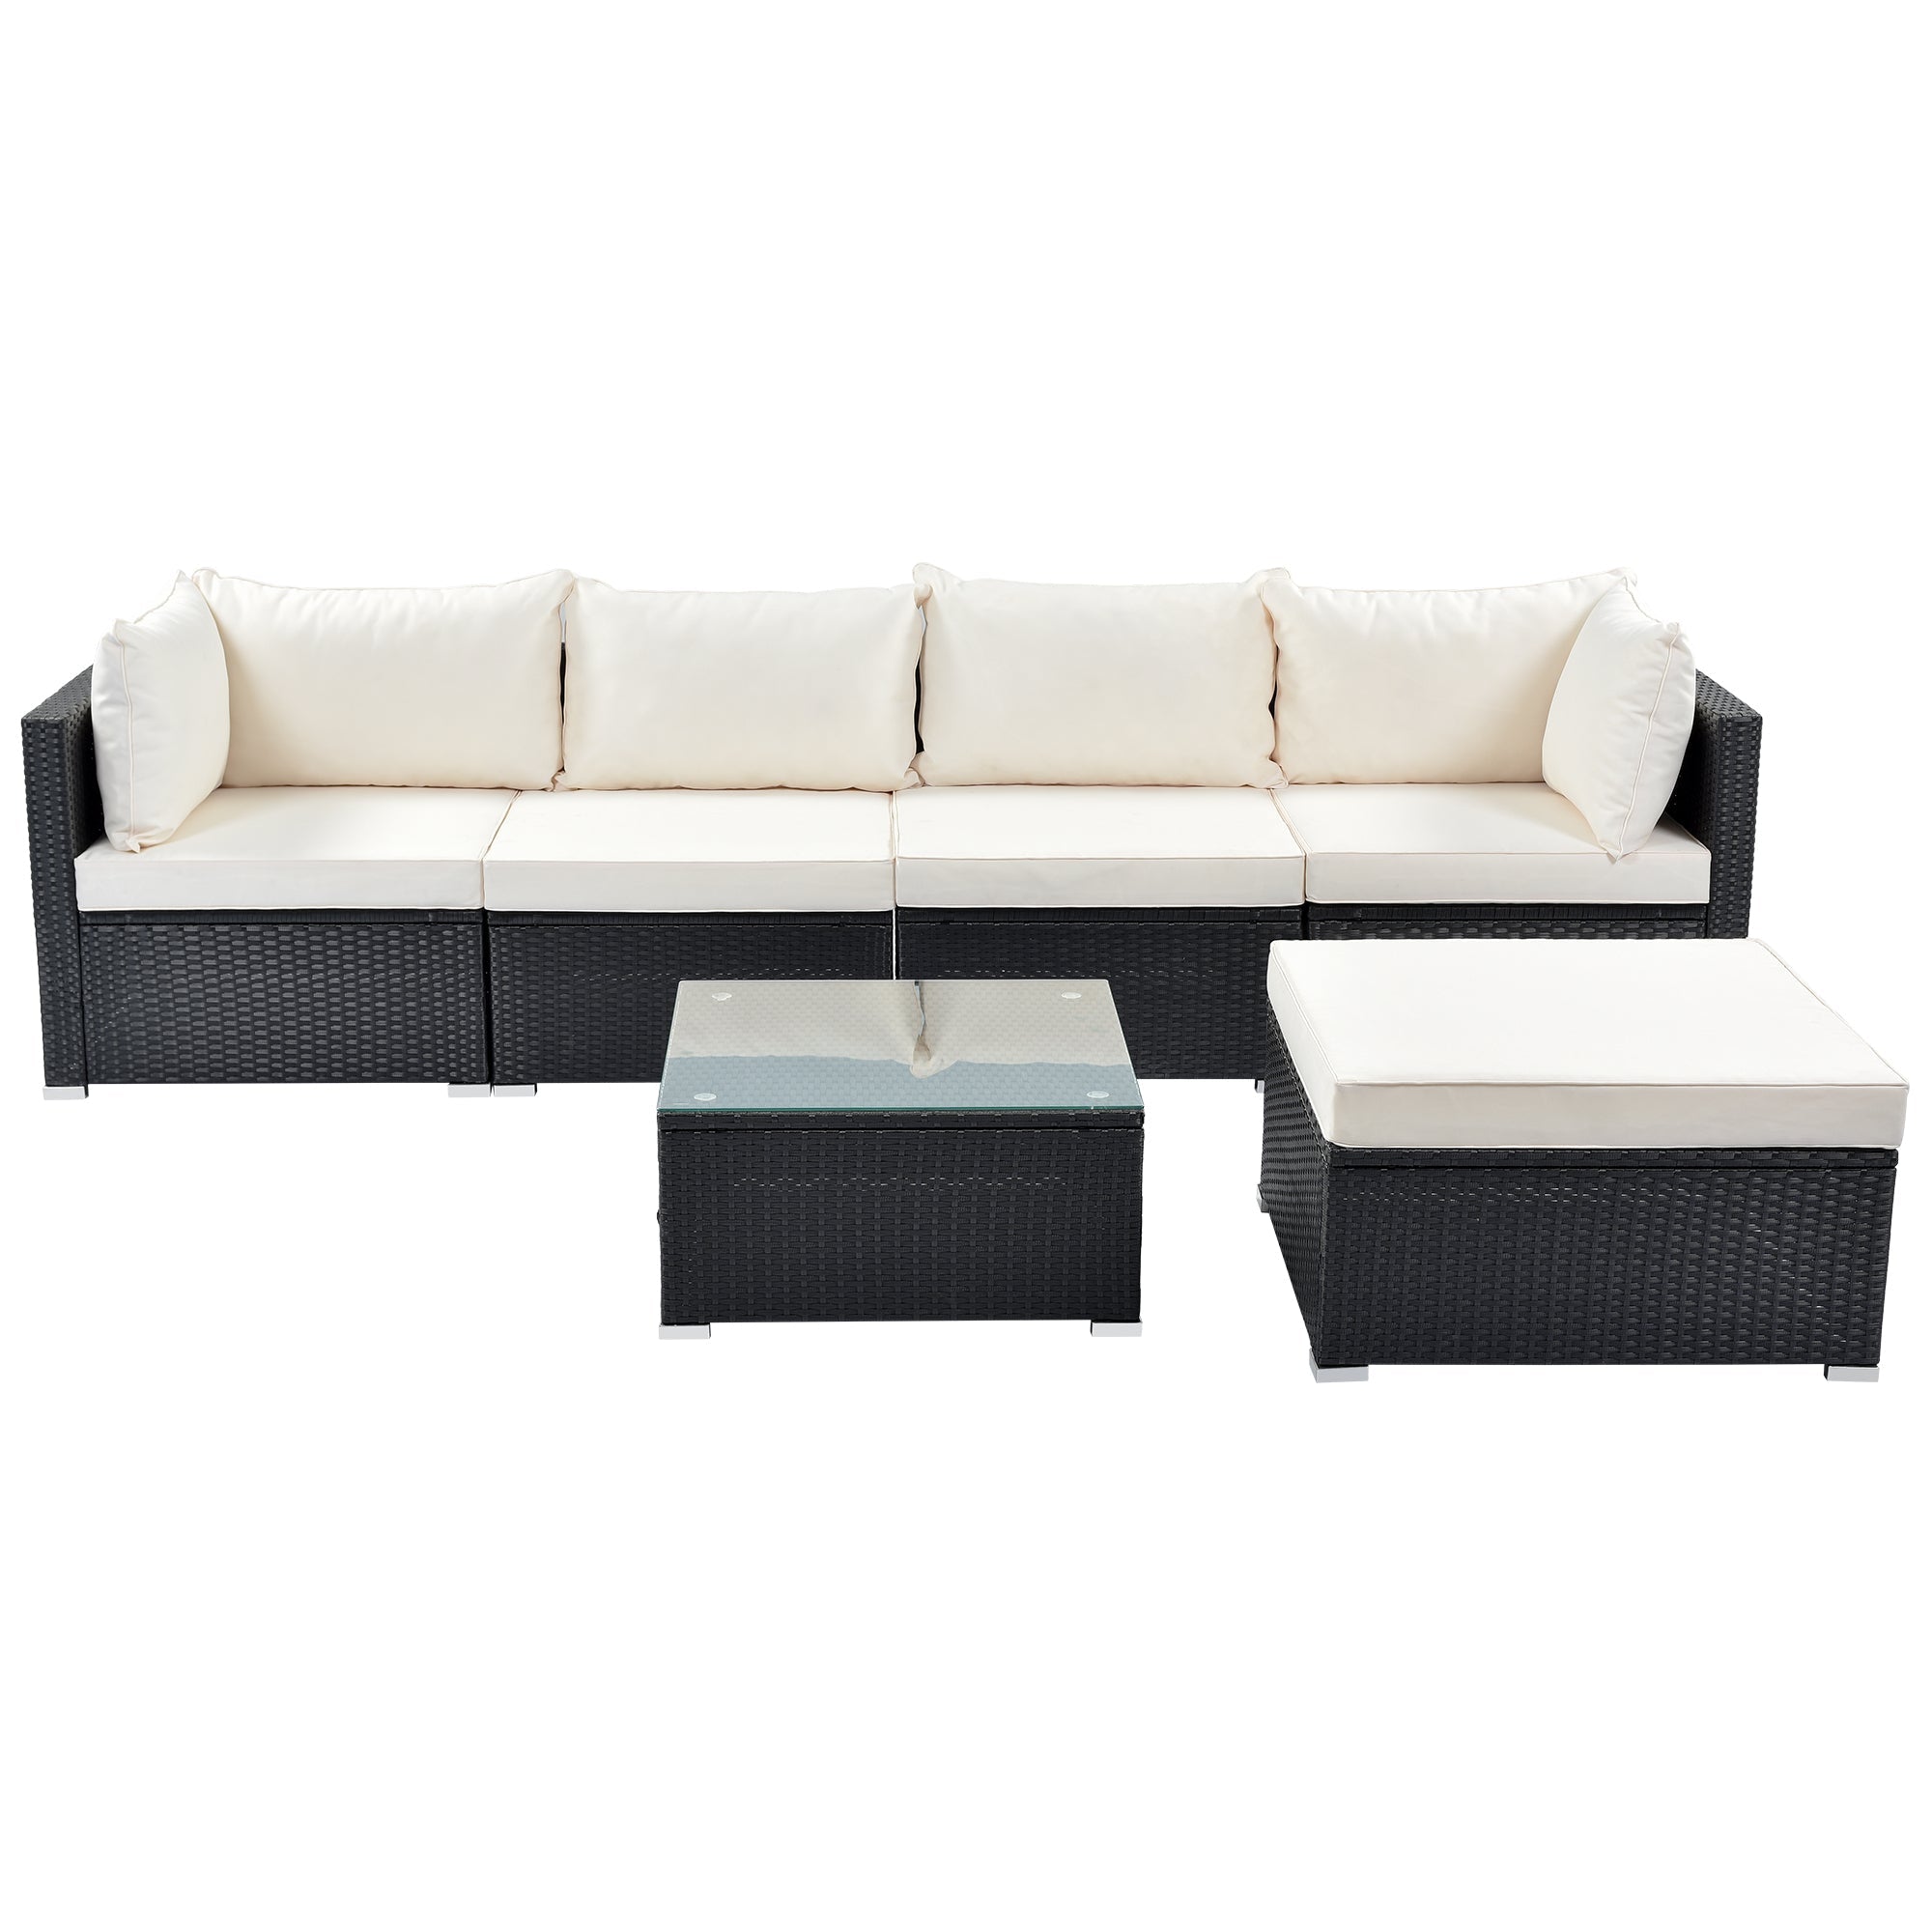 GO 6-Piece Patio Furniture Set corner sofa set with thick removable cushions, PE Rattan Wicker, outdoor Garden Sectional Sofa Chair, removable Beige cushions, Black wicker